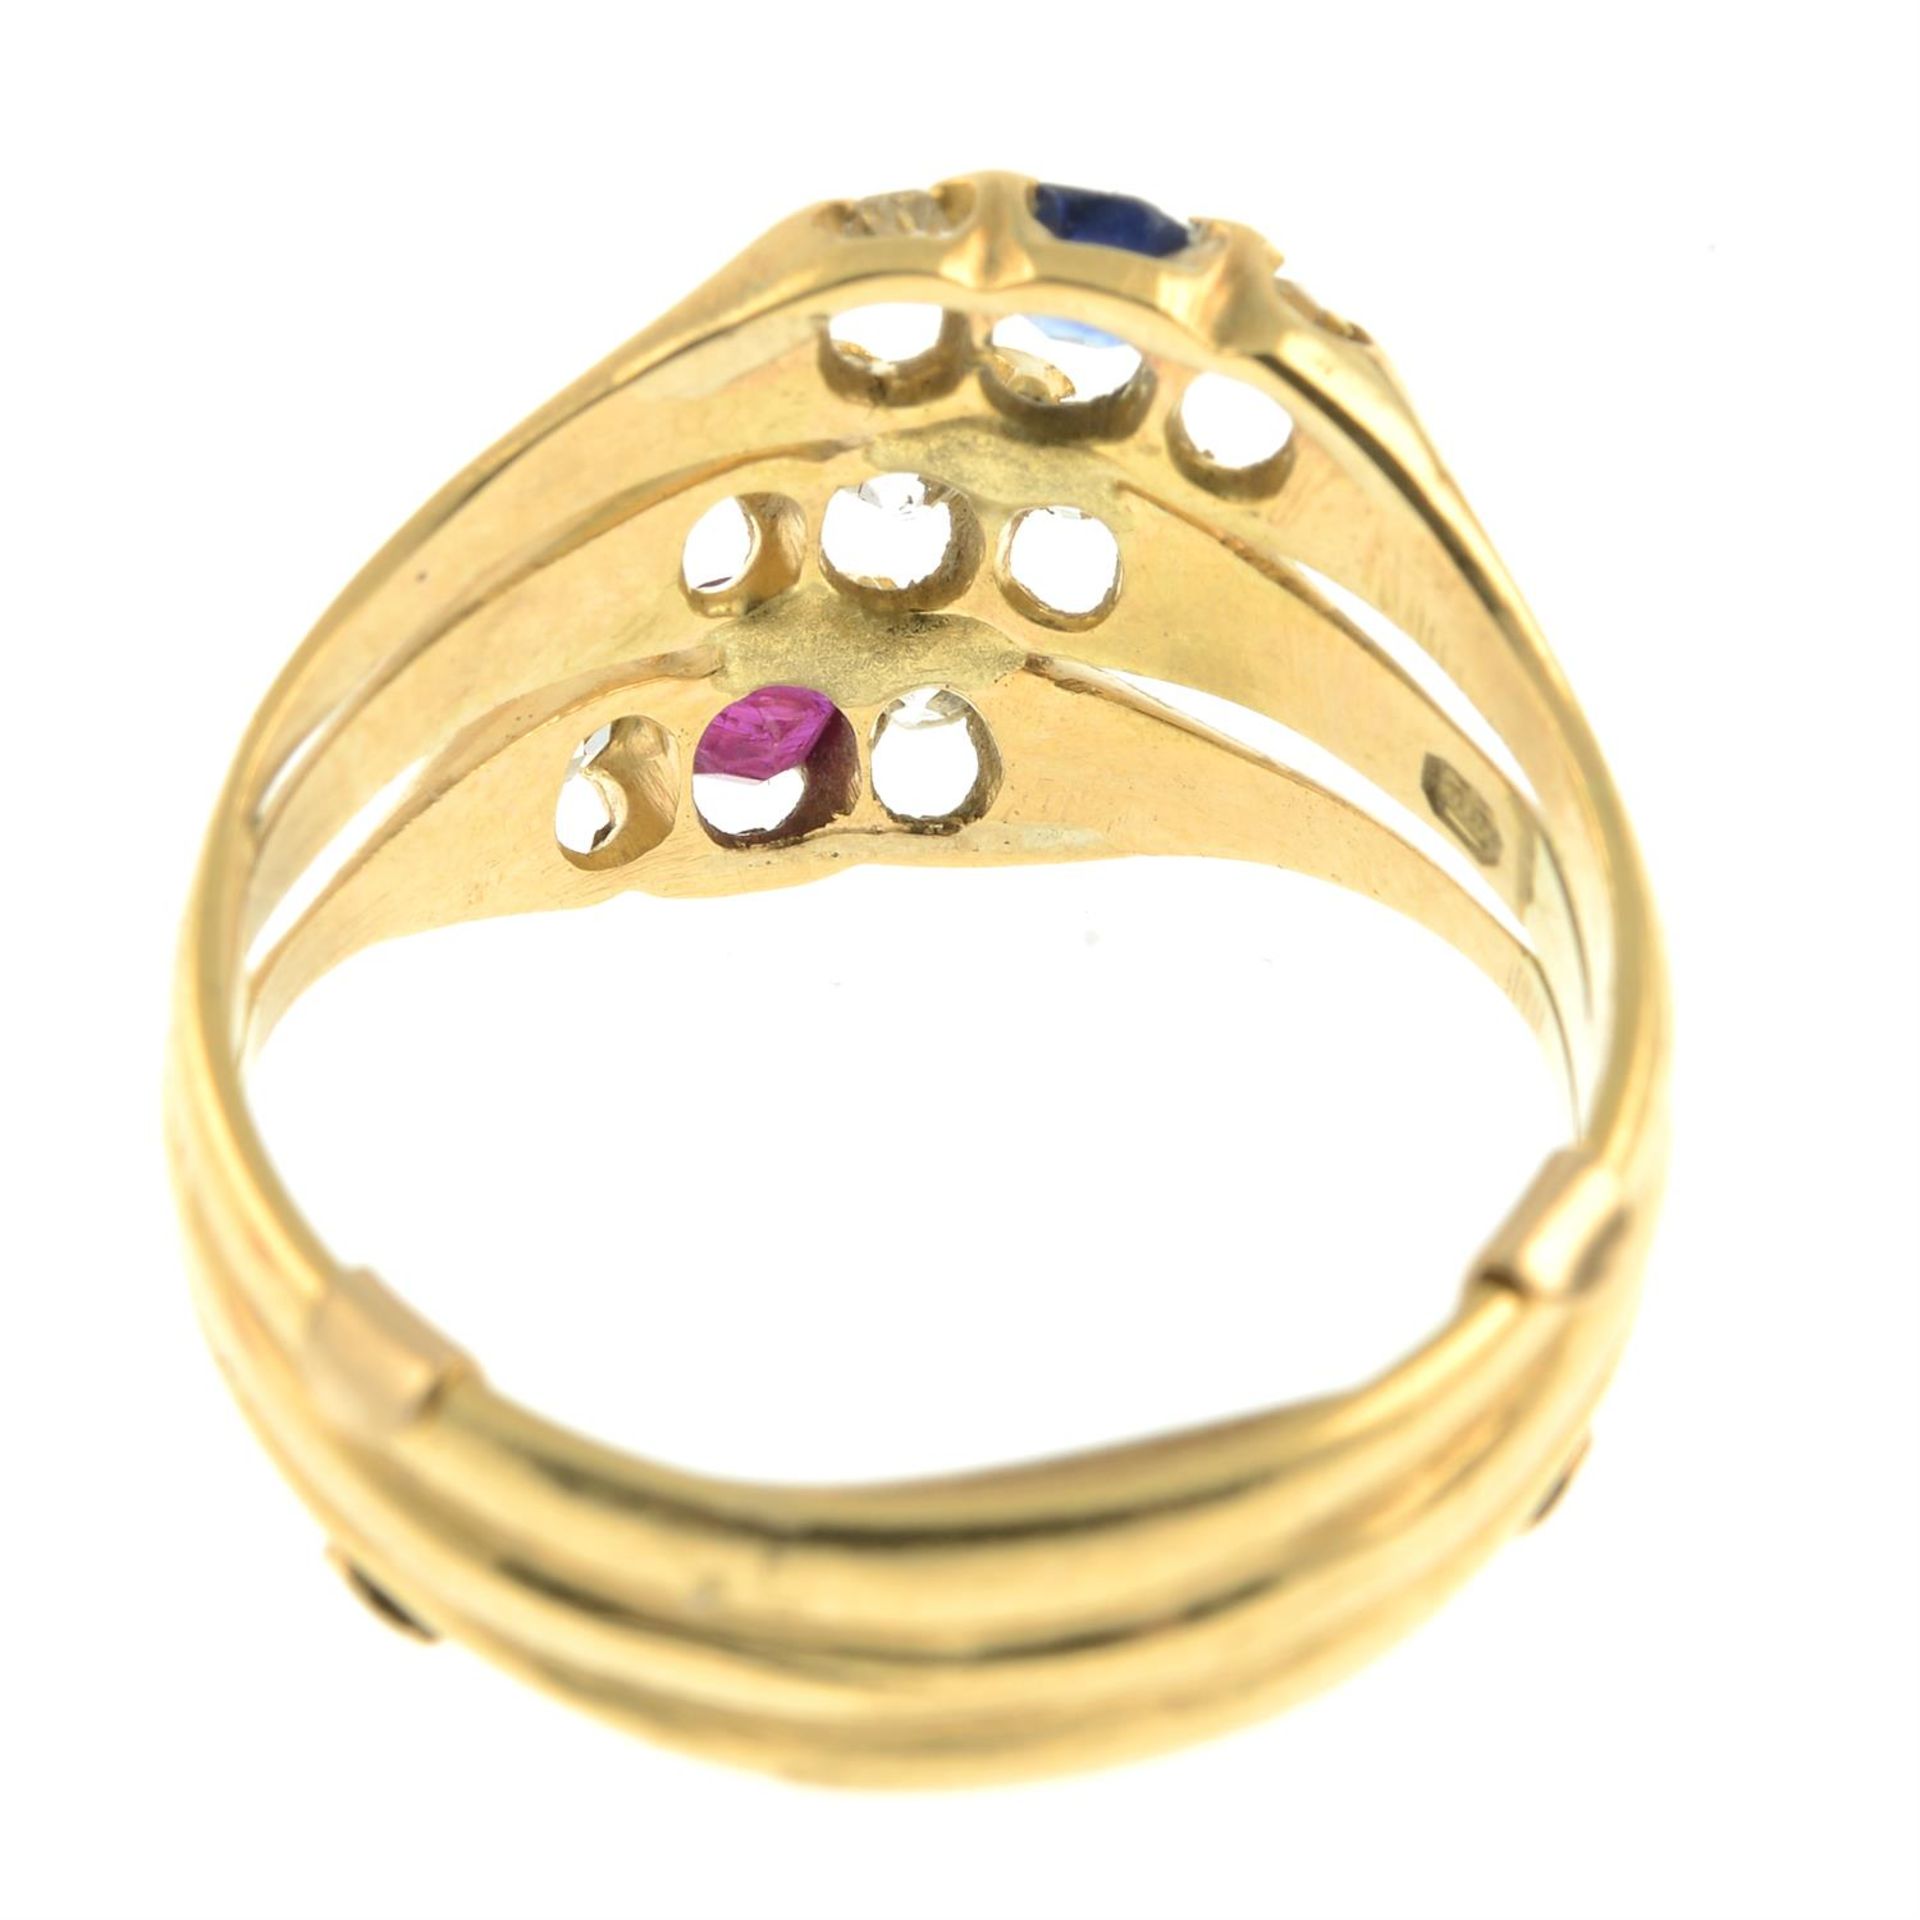 An early 20th century 18ct gold ruby, diamond and sapphire patriotic ring. - Image 4 of 5